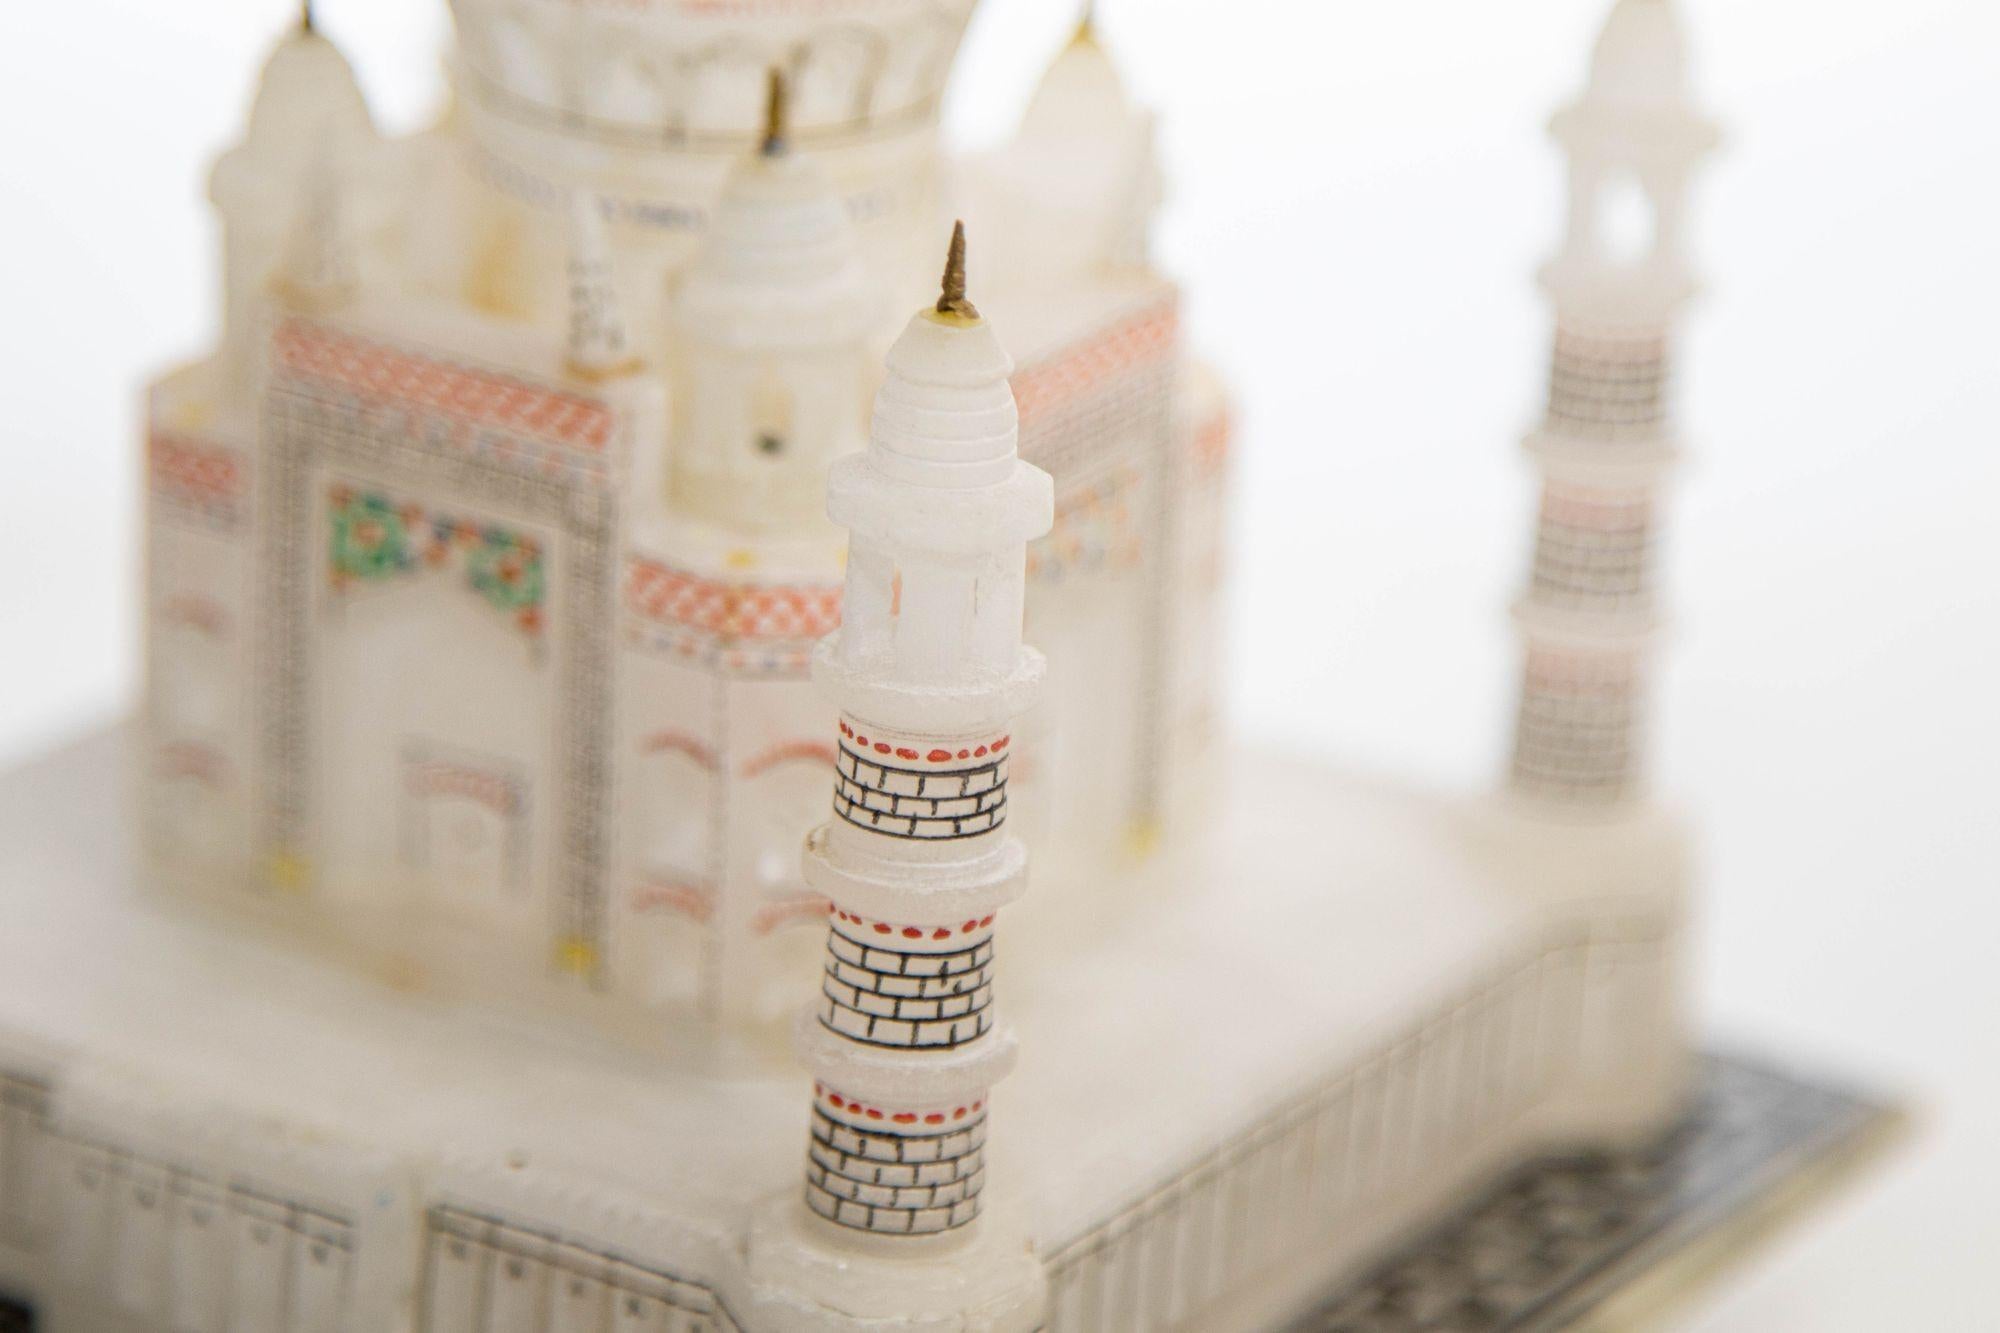 Taj Mahal White Marble Hand-Crafted Collectible Miniature Model In Good Condition For Sale In North Hollywood, CA